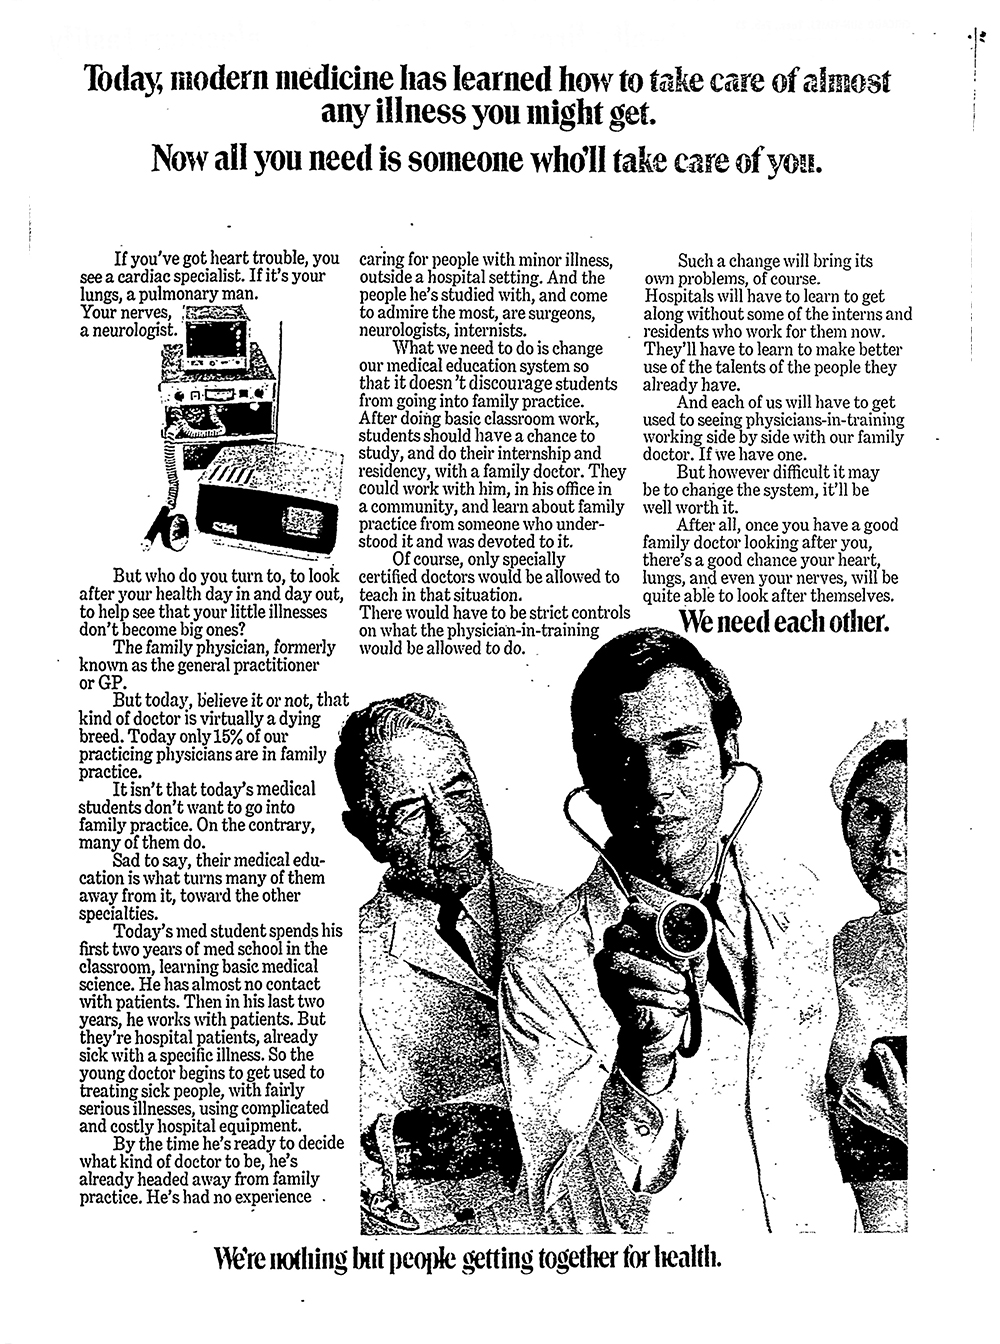 HCSC scan of newspaper advertisement from the Chicago Sun-Times.